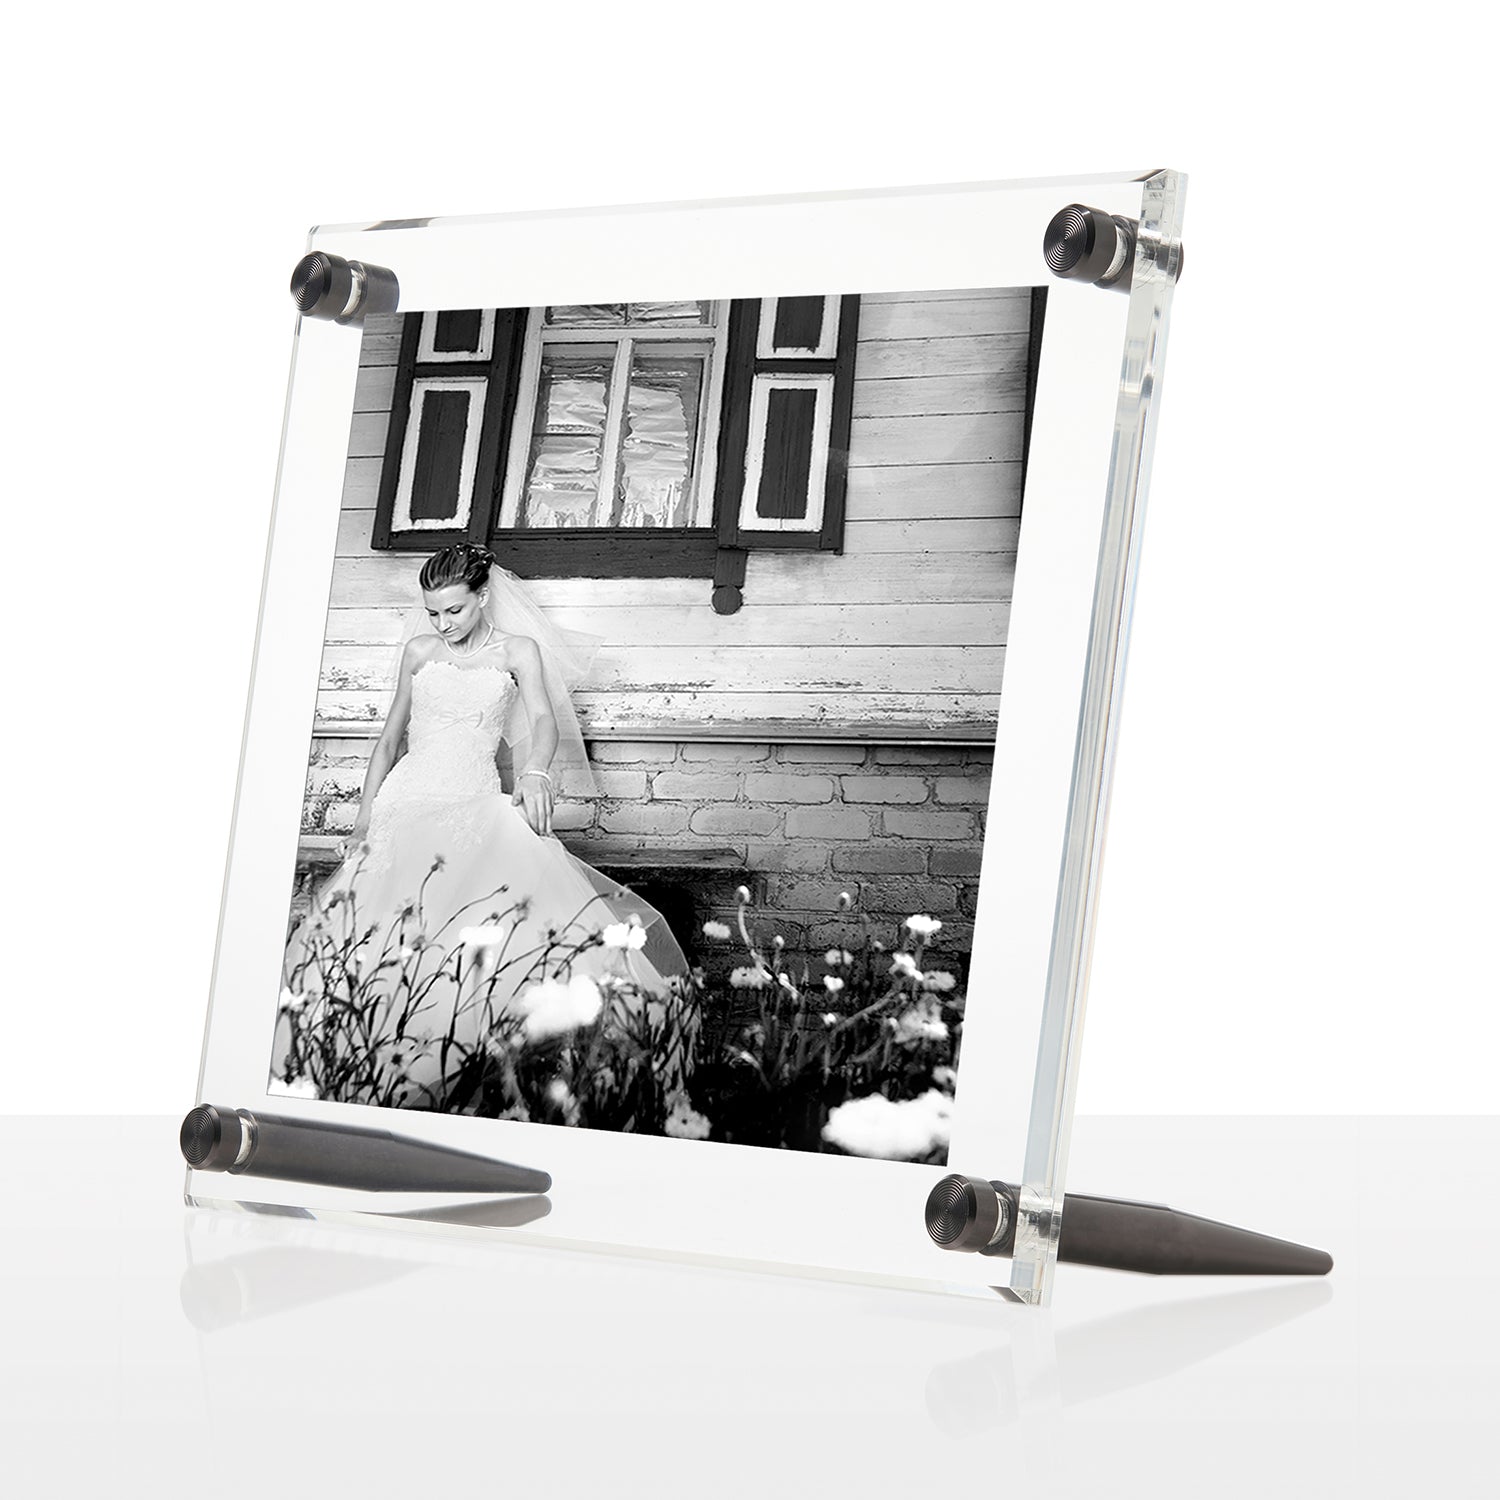 Wexel Art 6x8-Inch Diamond Polished Beveled Edge Framing Grade Acrylic Tabletop Floating Frame with Gold Hardware for 4x6-inch Art & Photos